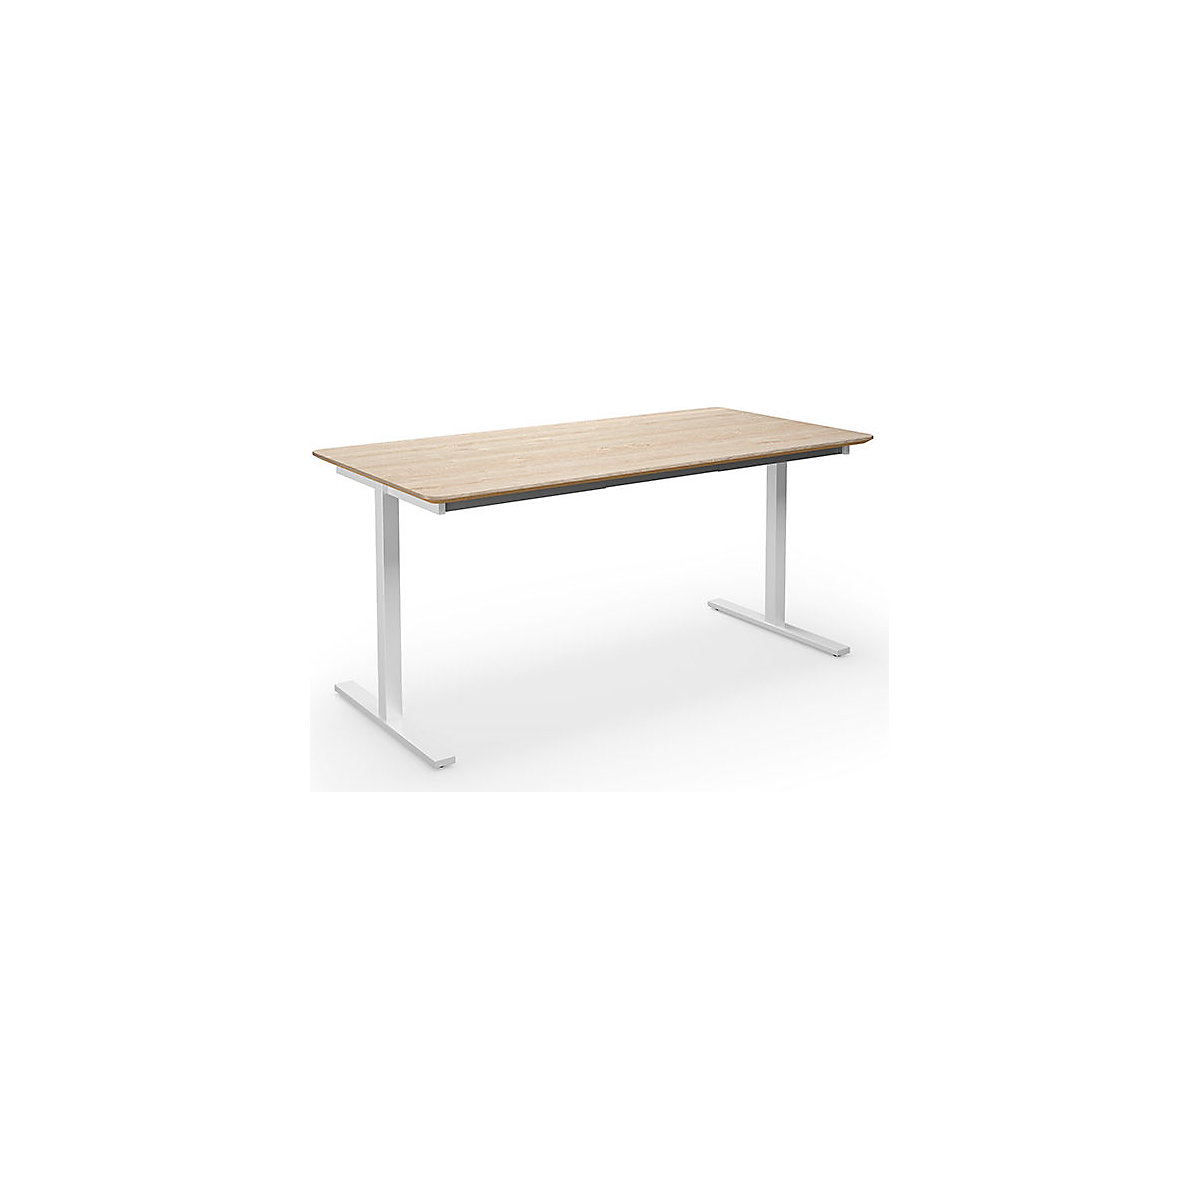 DUO-T Trend multi-purpose desk, straight tabletop, rounded corners, WxD 1600 x 800 mm, oak, white-3